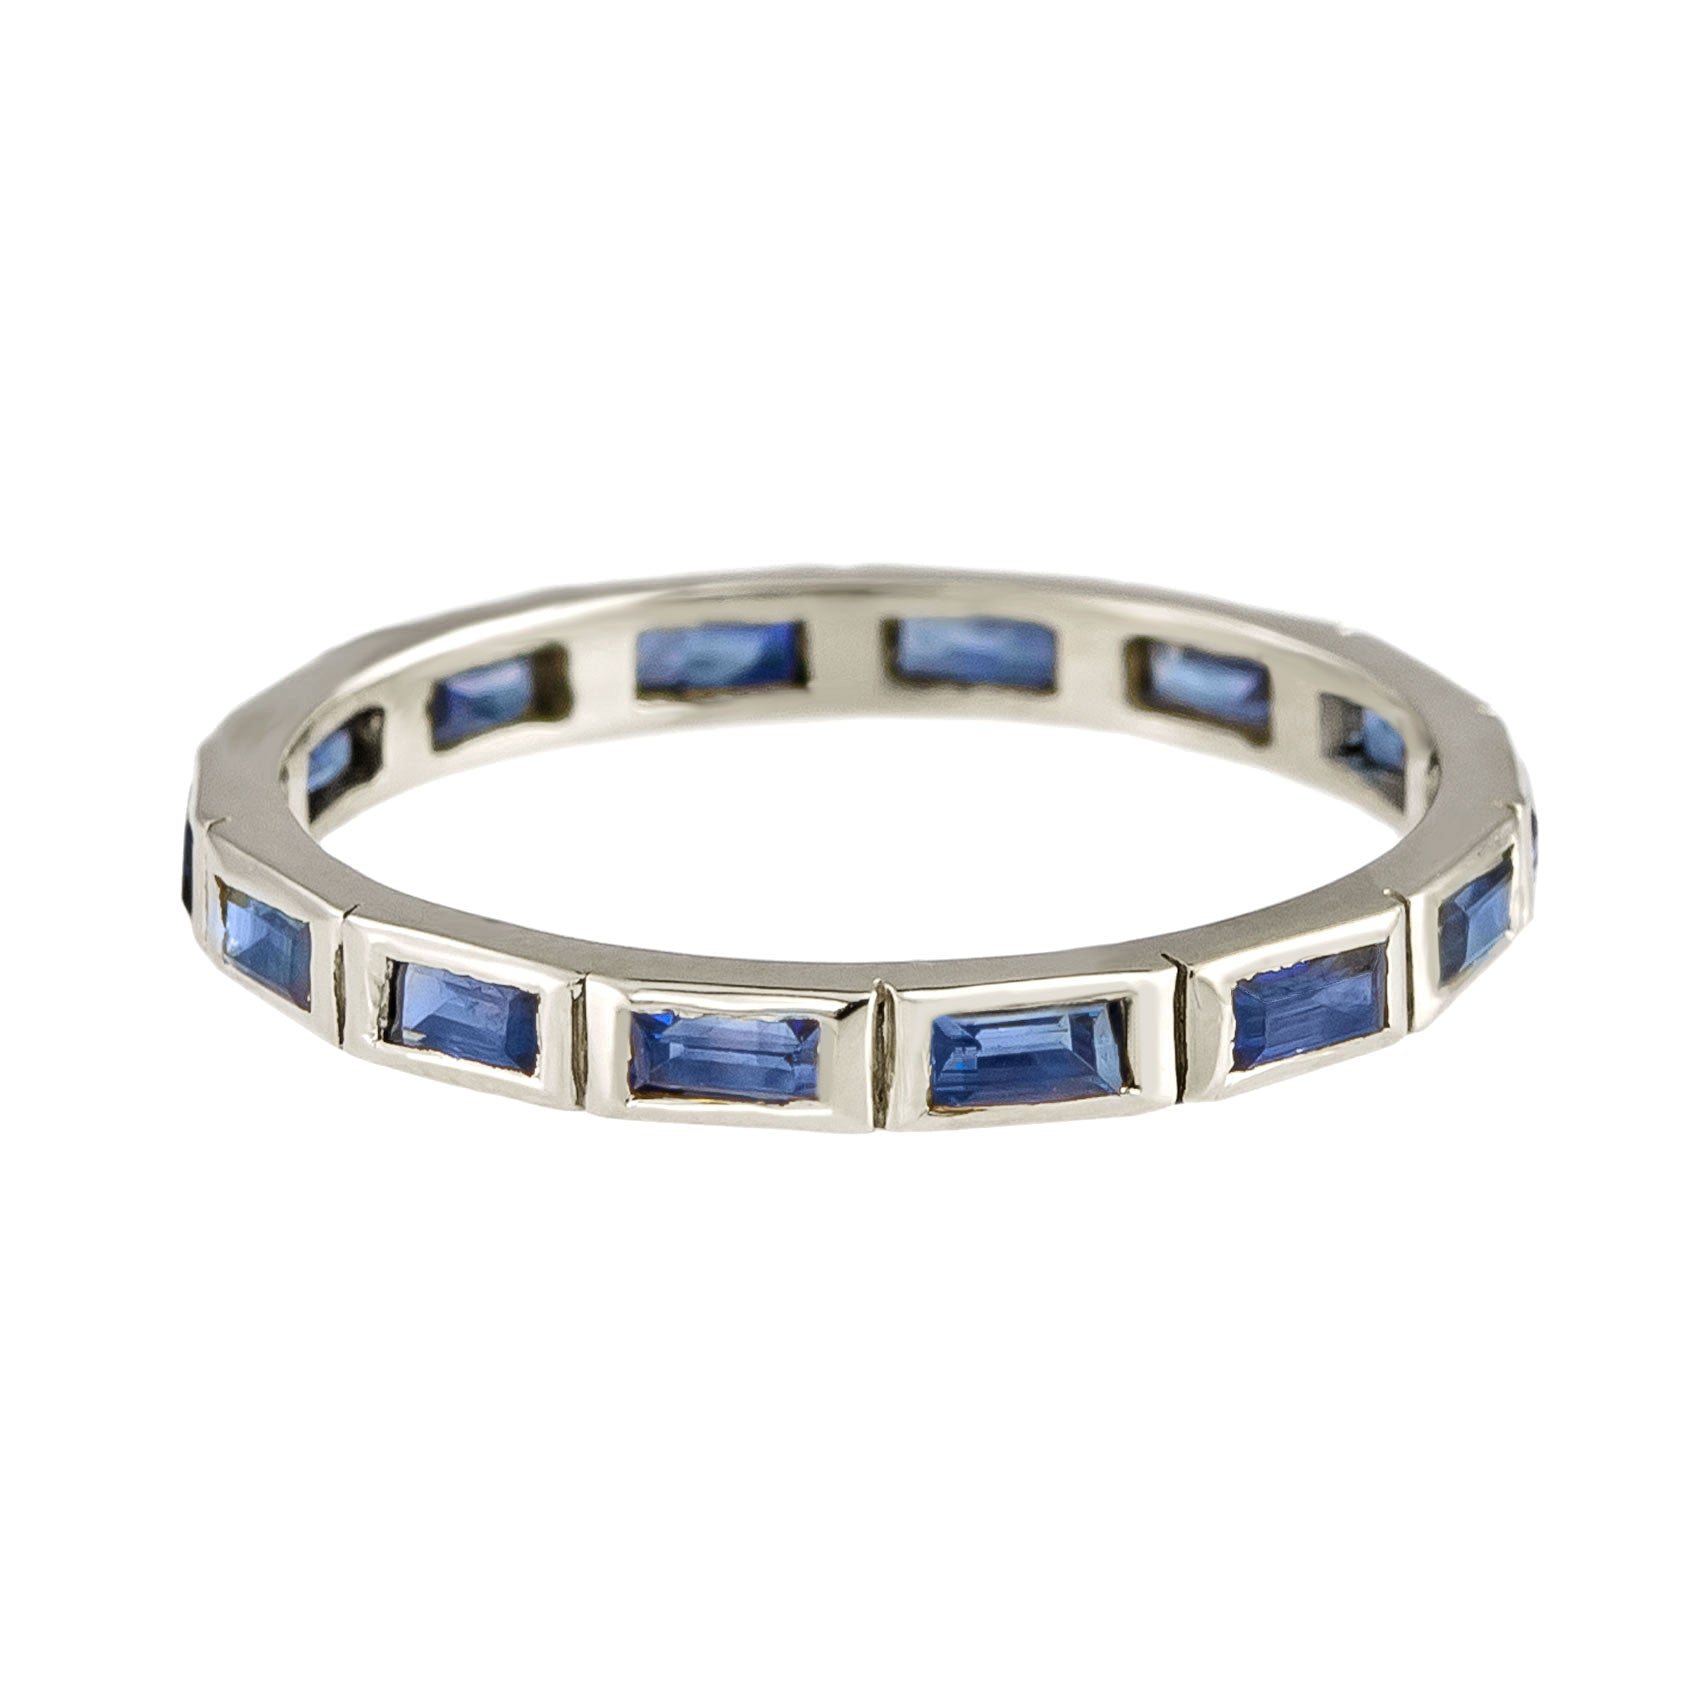 Metier by tomfoolery 9ct White Gold Blue Sapphire Full Eternity Rings. Baguette Cut.